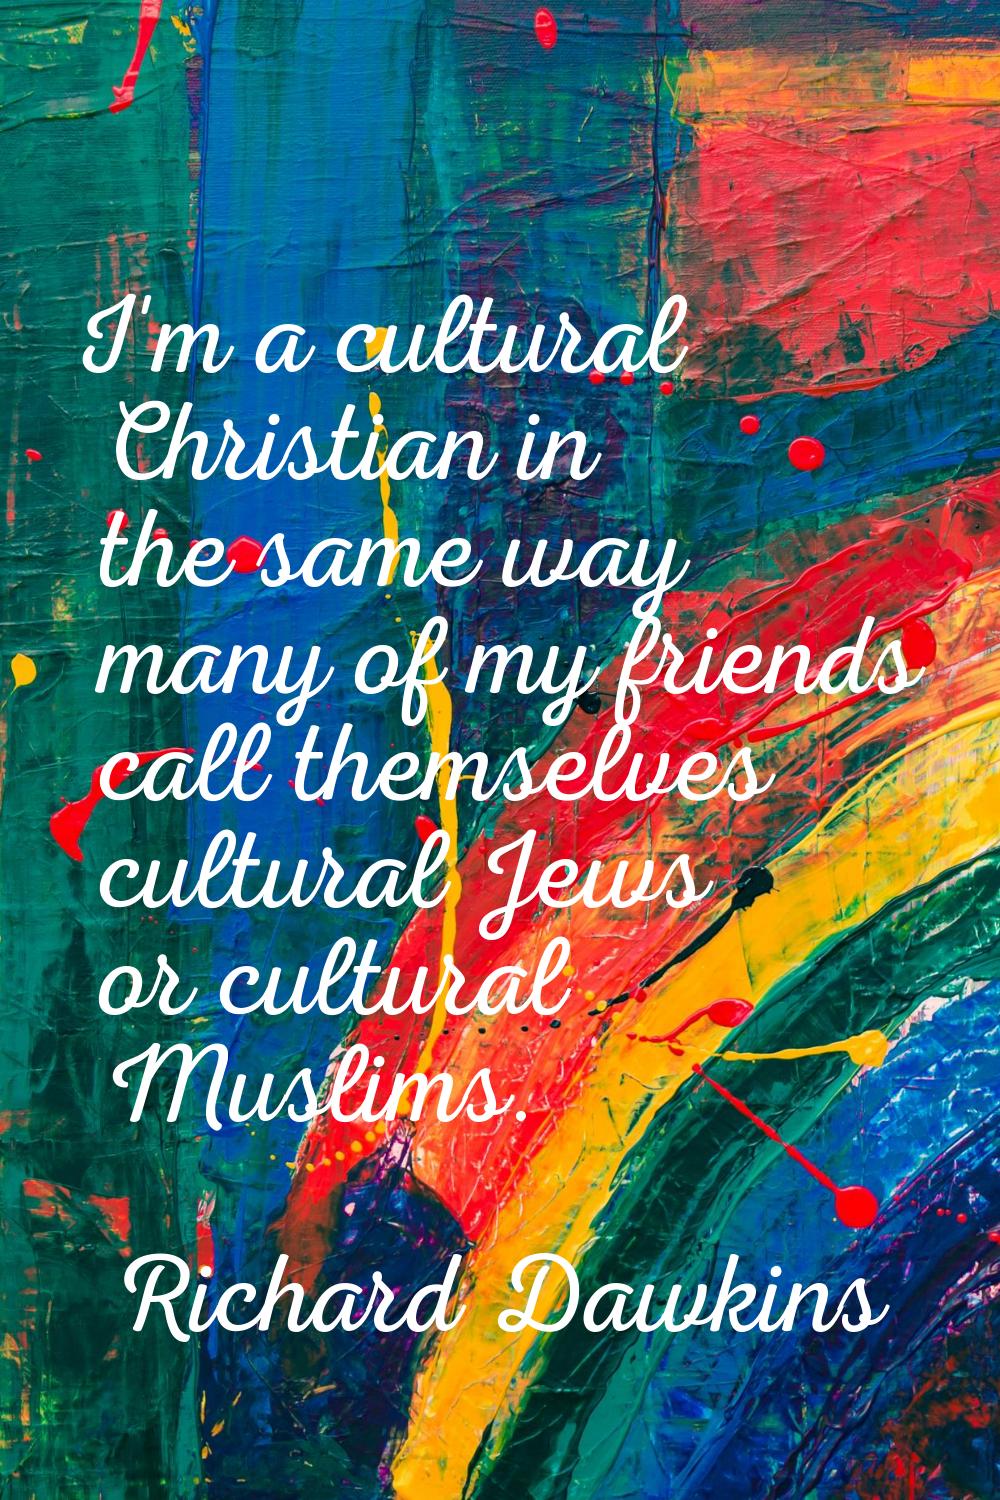 I'm a cultural Christian in the same way many of my friends call themselves cultural Jews or cultur